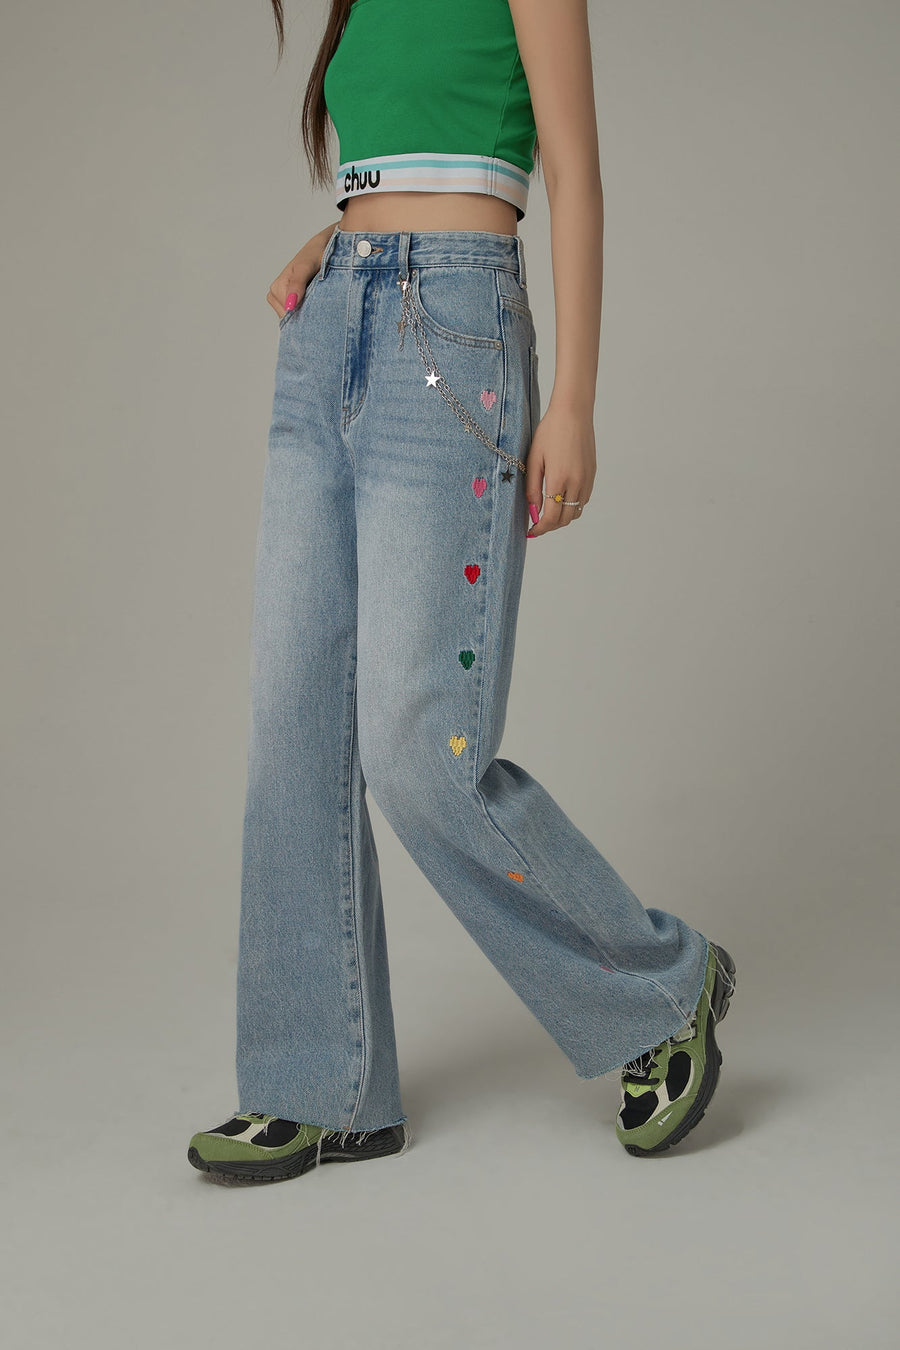 CHUU Colorful Heart Embroidered Denim Straight Wide Jeans